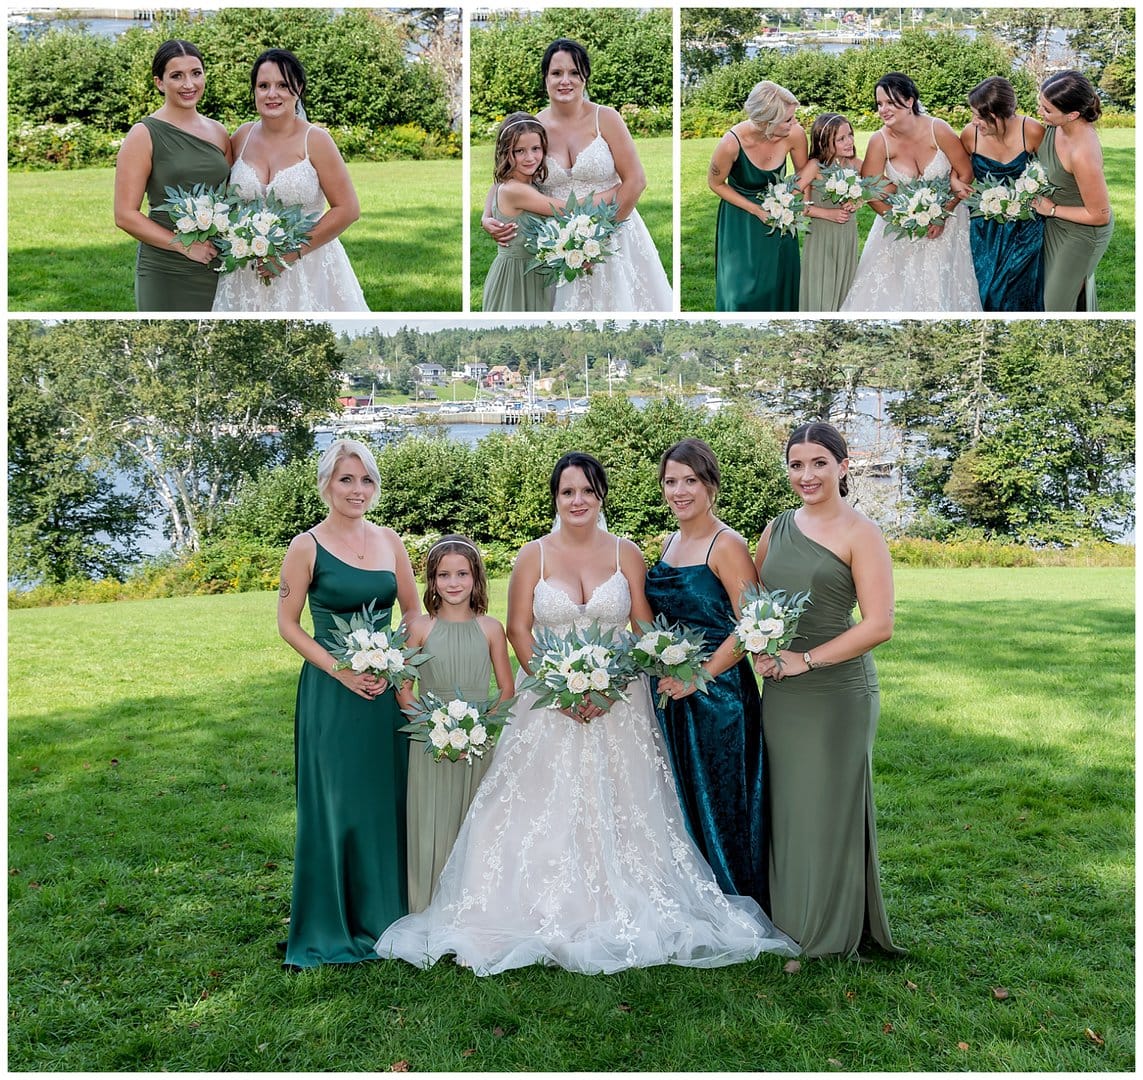 The bride with her bridesmaids pose for wedding photos in Hubbards NS.